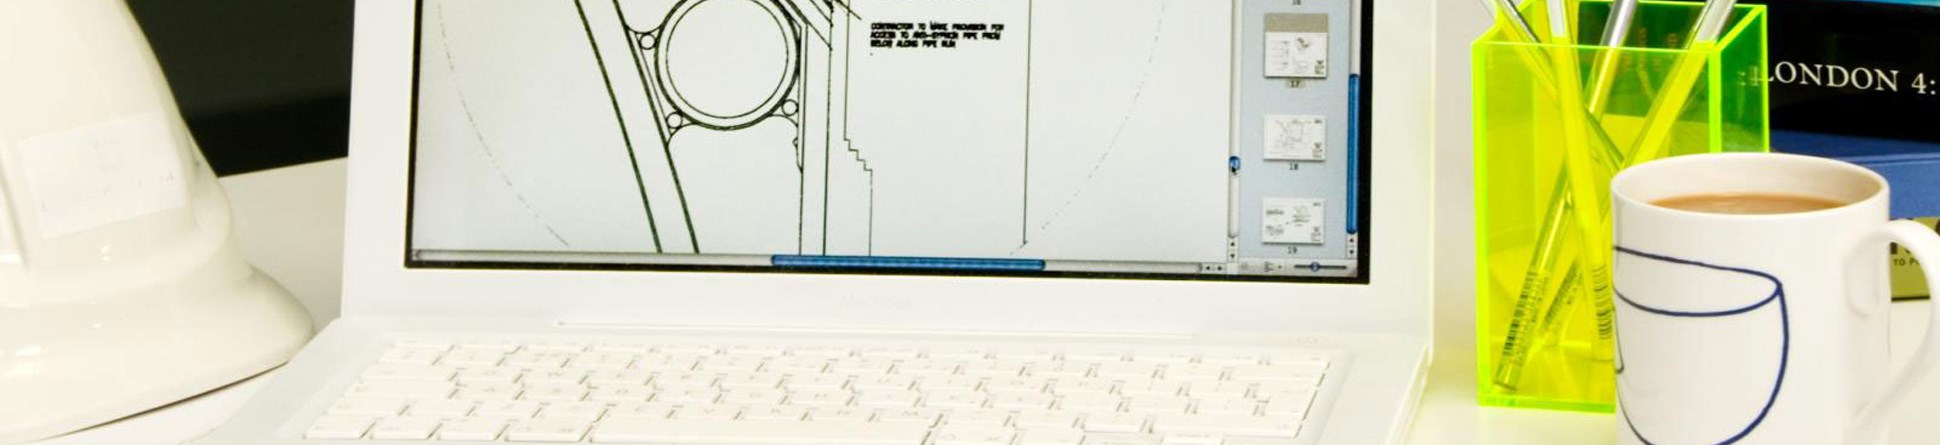 Detail of office environment including building plans on a laptop screen and a hard hat on the desk next to it.